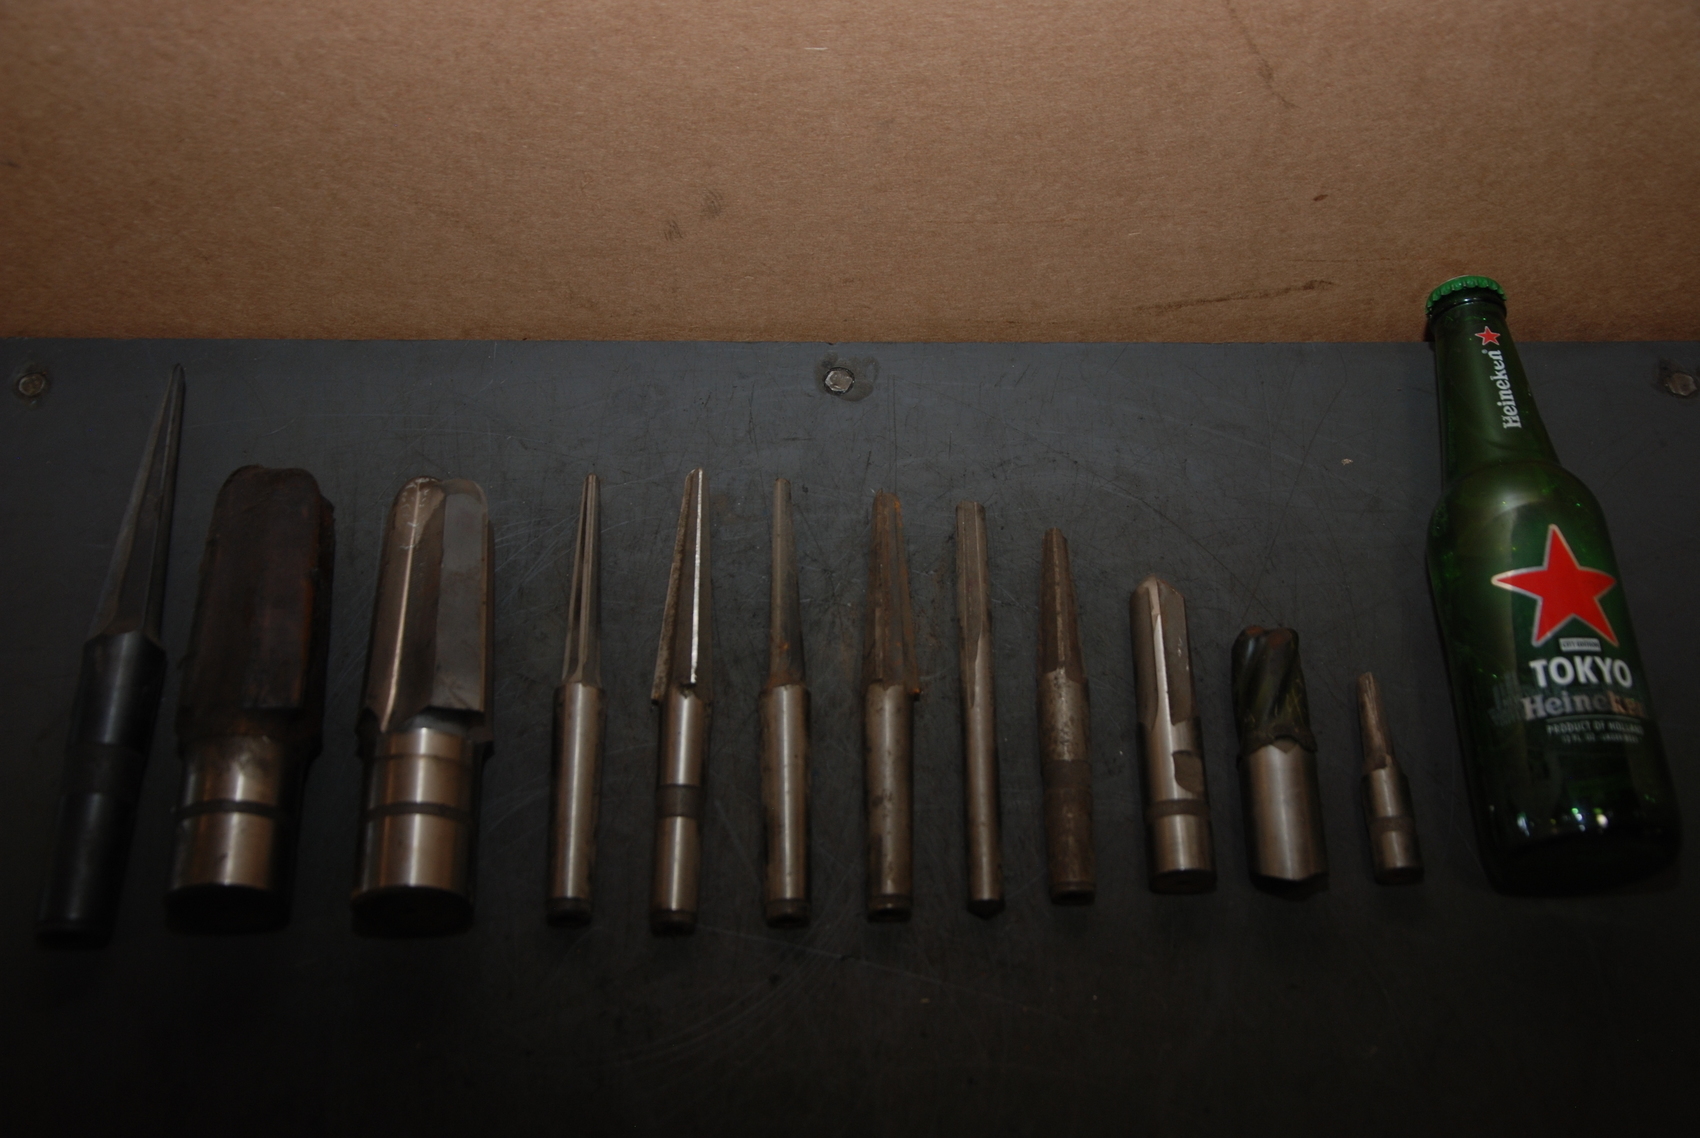 Lot of 12 straight shank HSS driLLs,reamers,end mills